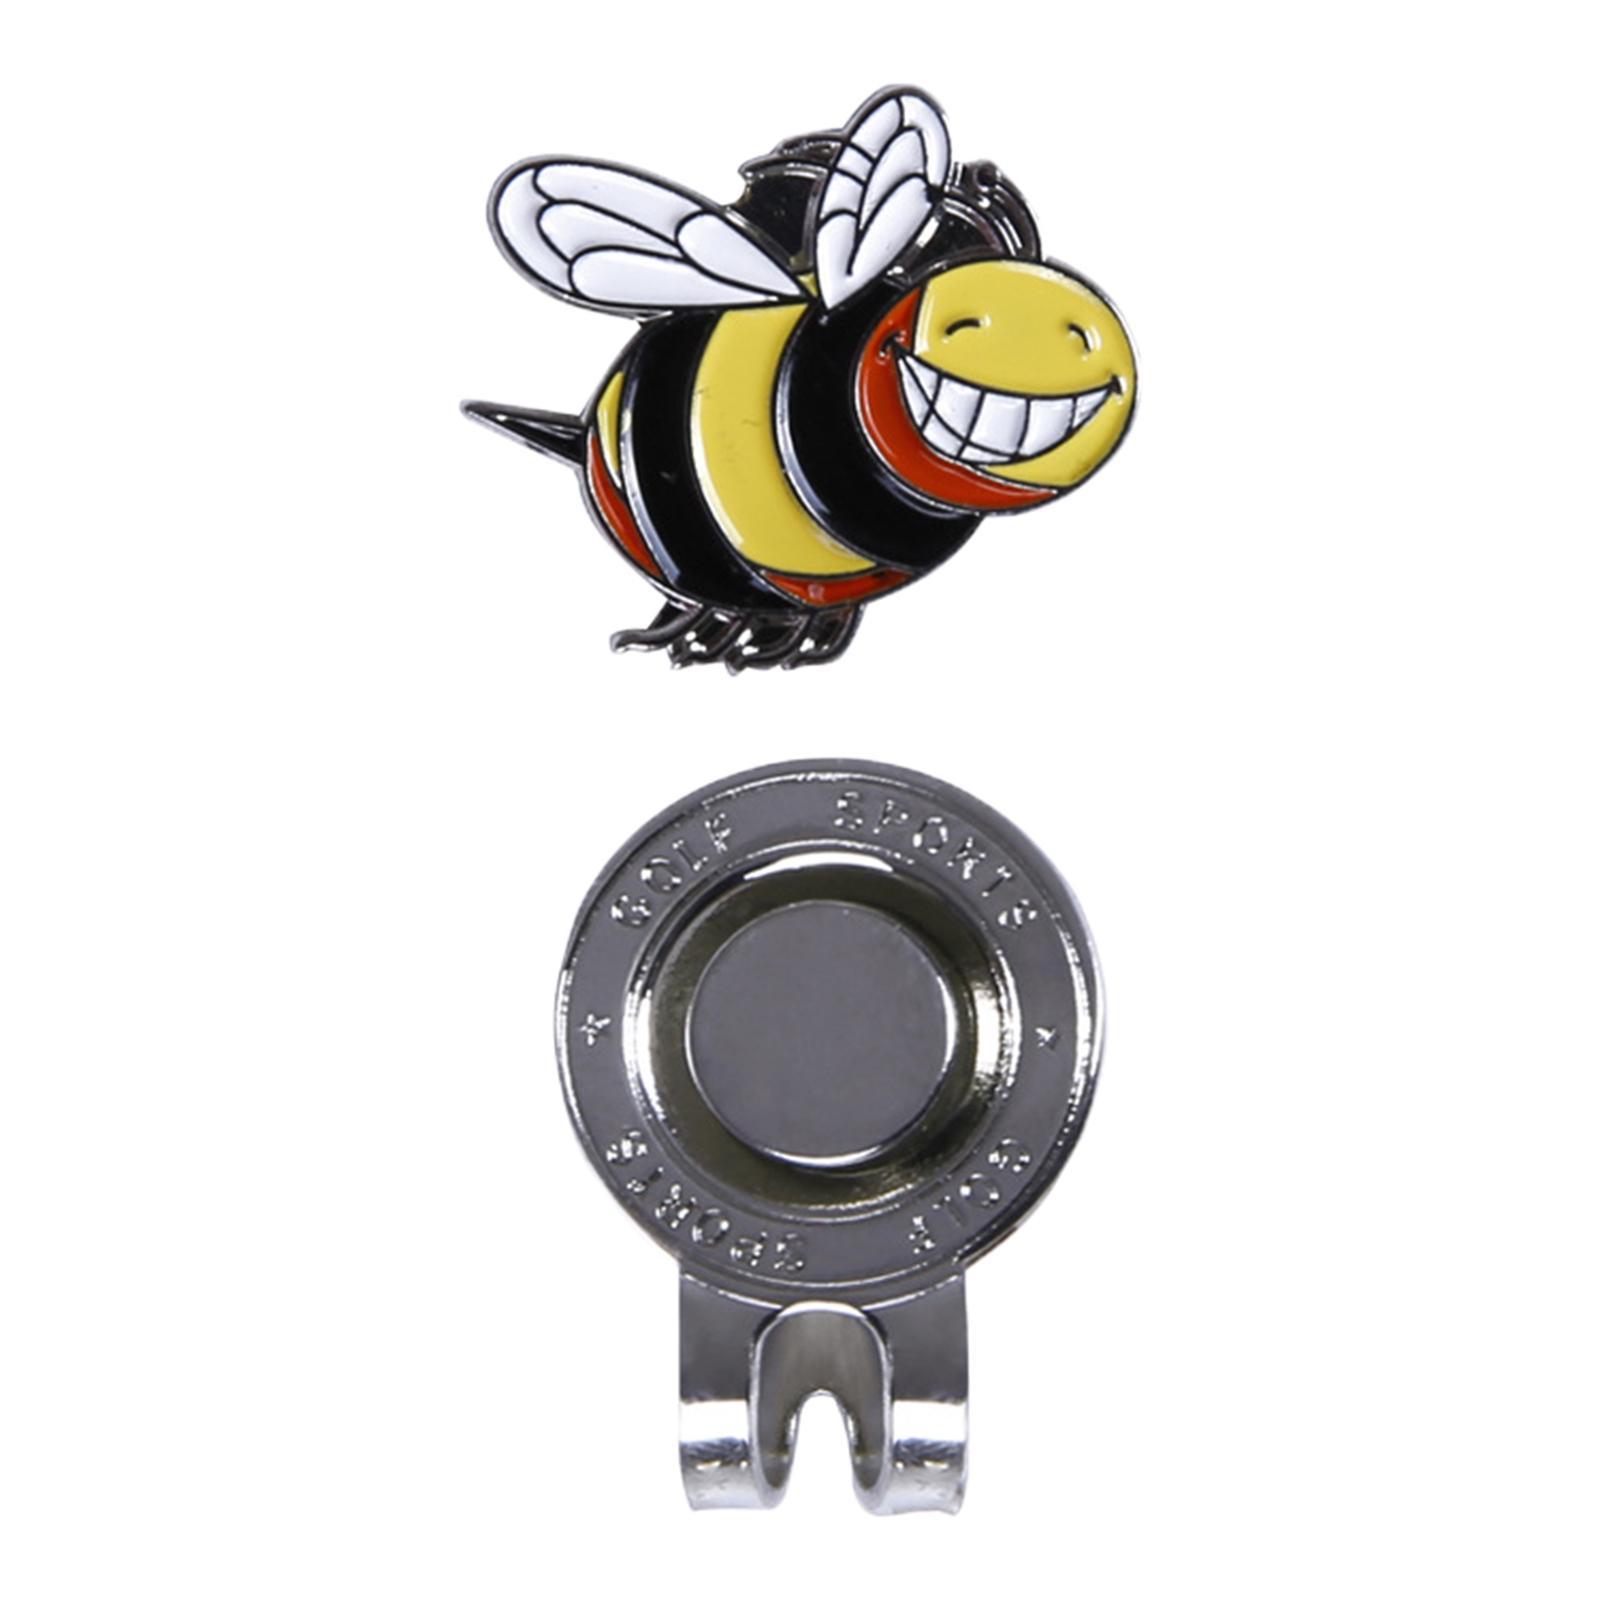 Novelty Alloy Golf Ball Marker with Hat Clip Golfer Gift Golf Accessories